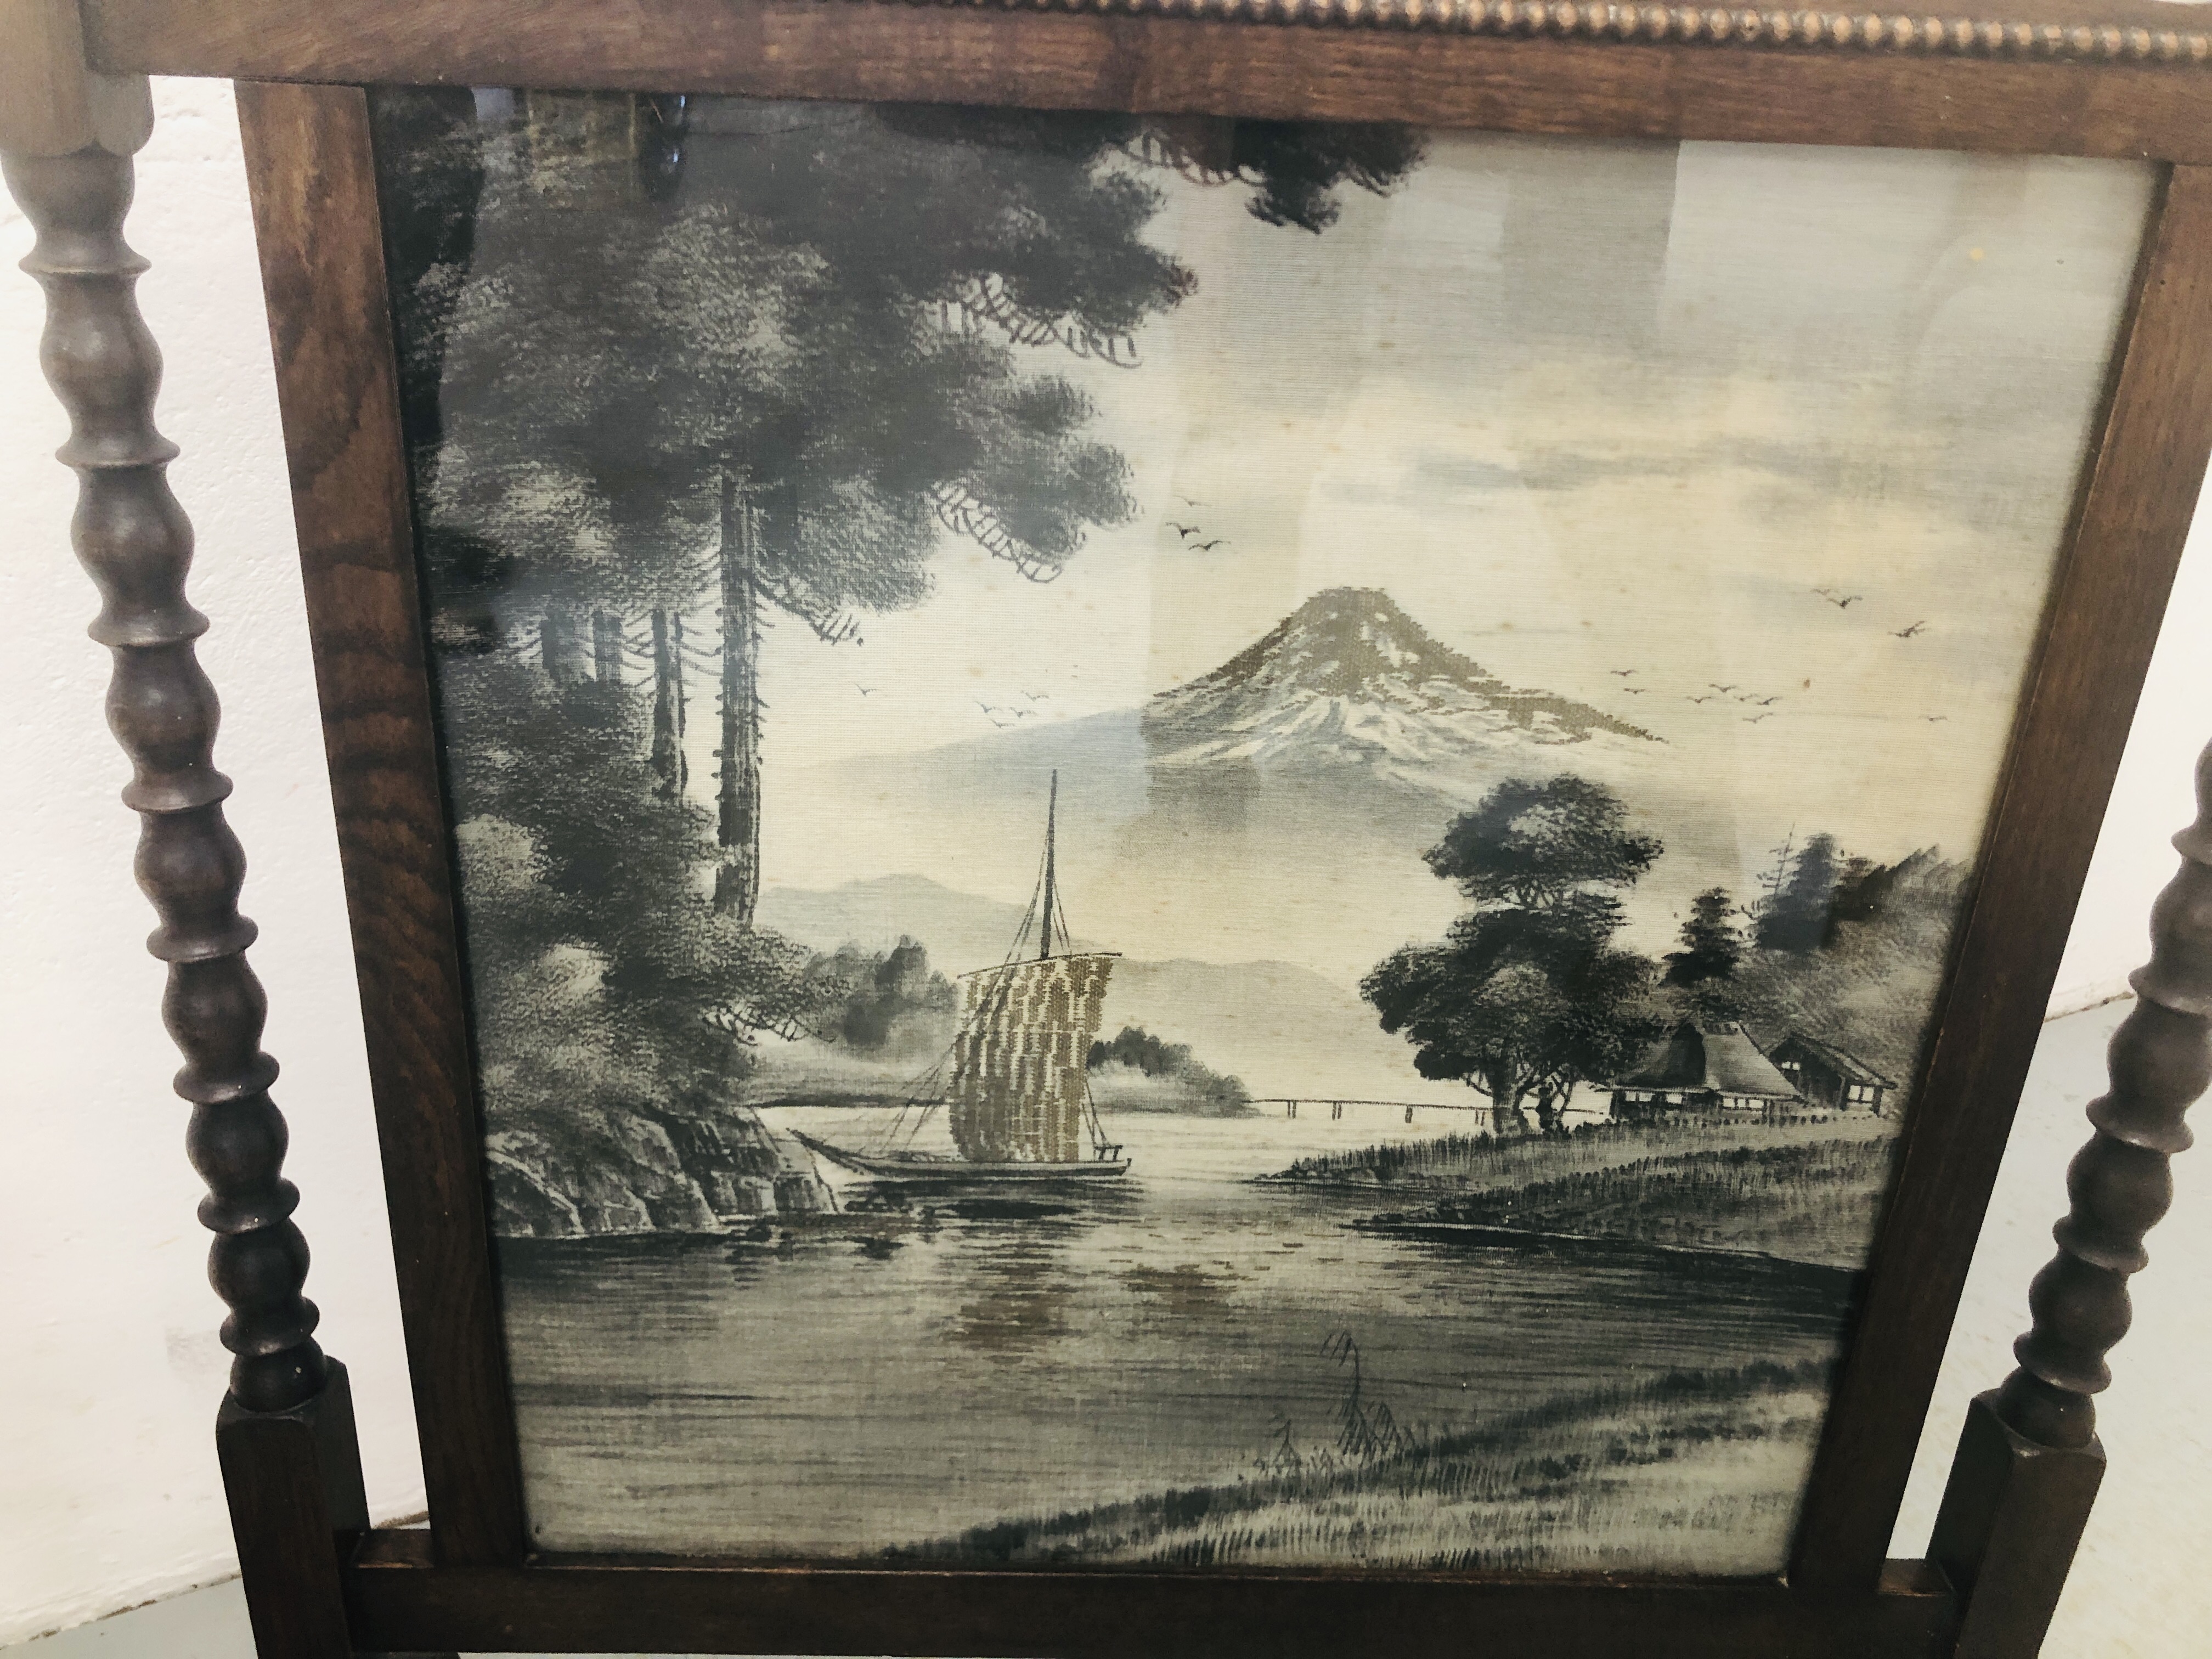 A VINTAGE STITCHWORK IN FREESTANDING BARLEY TWIST FIRE SCREEN DEPICTING BOAT ON A LAKE ALONG WITH - Image 3 of 3